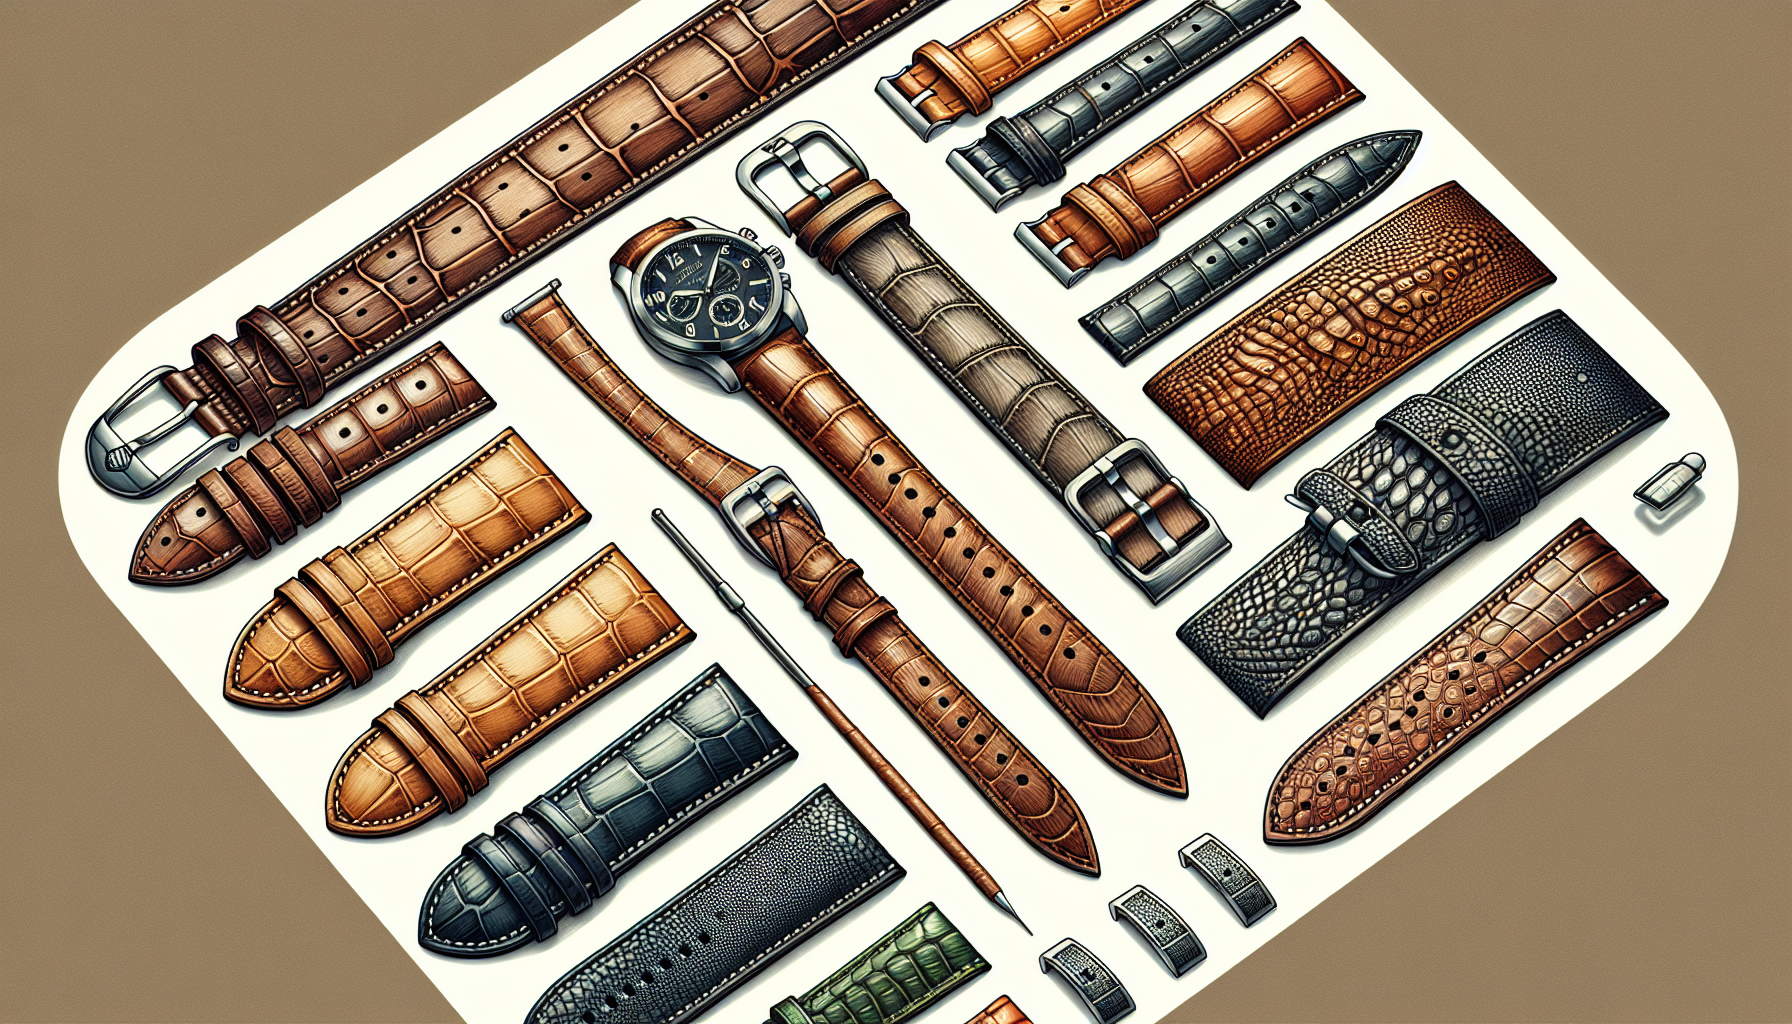 Illustration of different types of leather used in watch bands